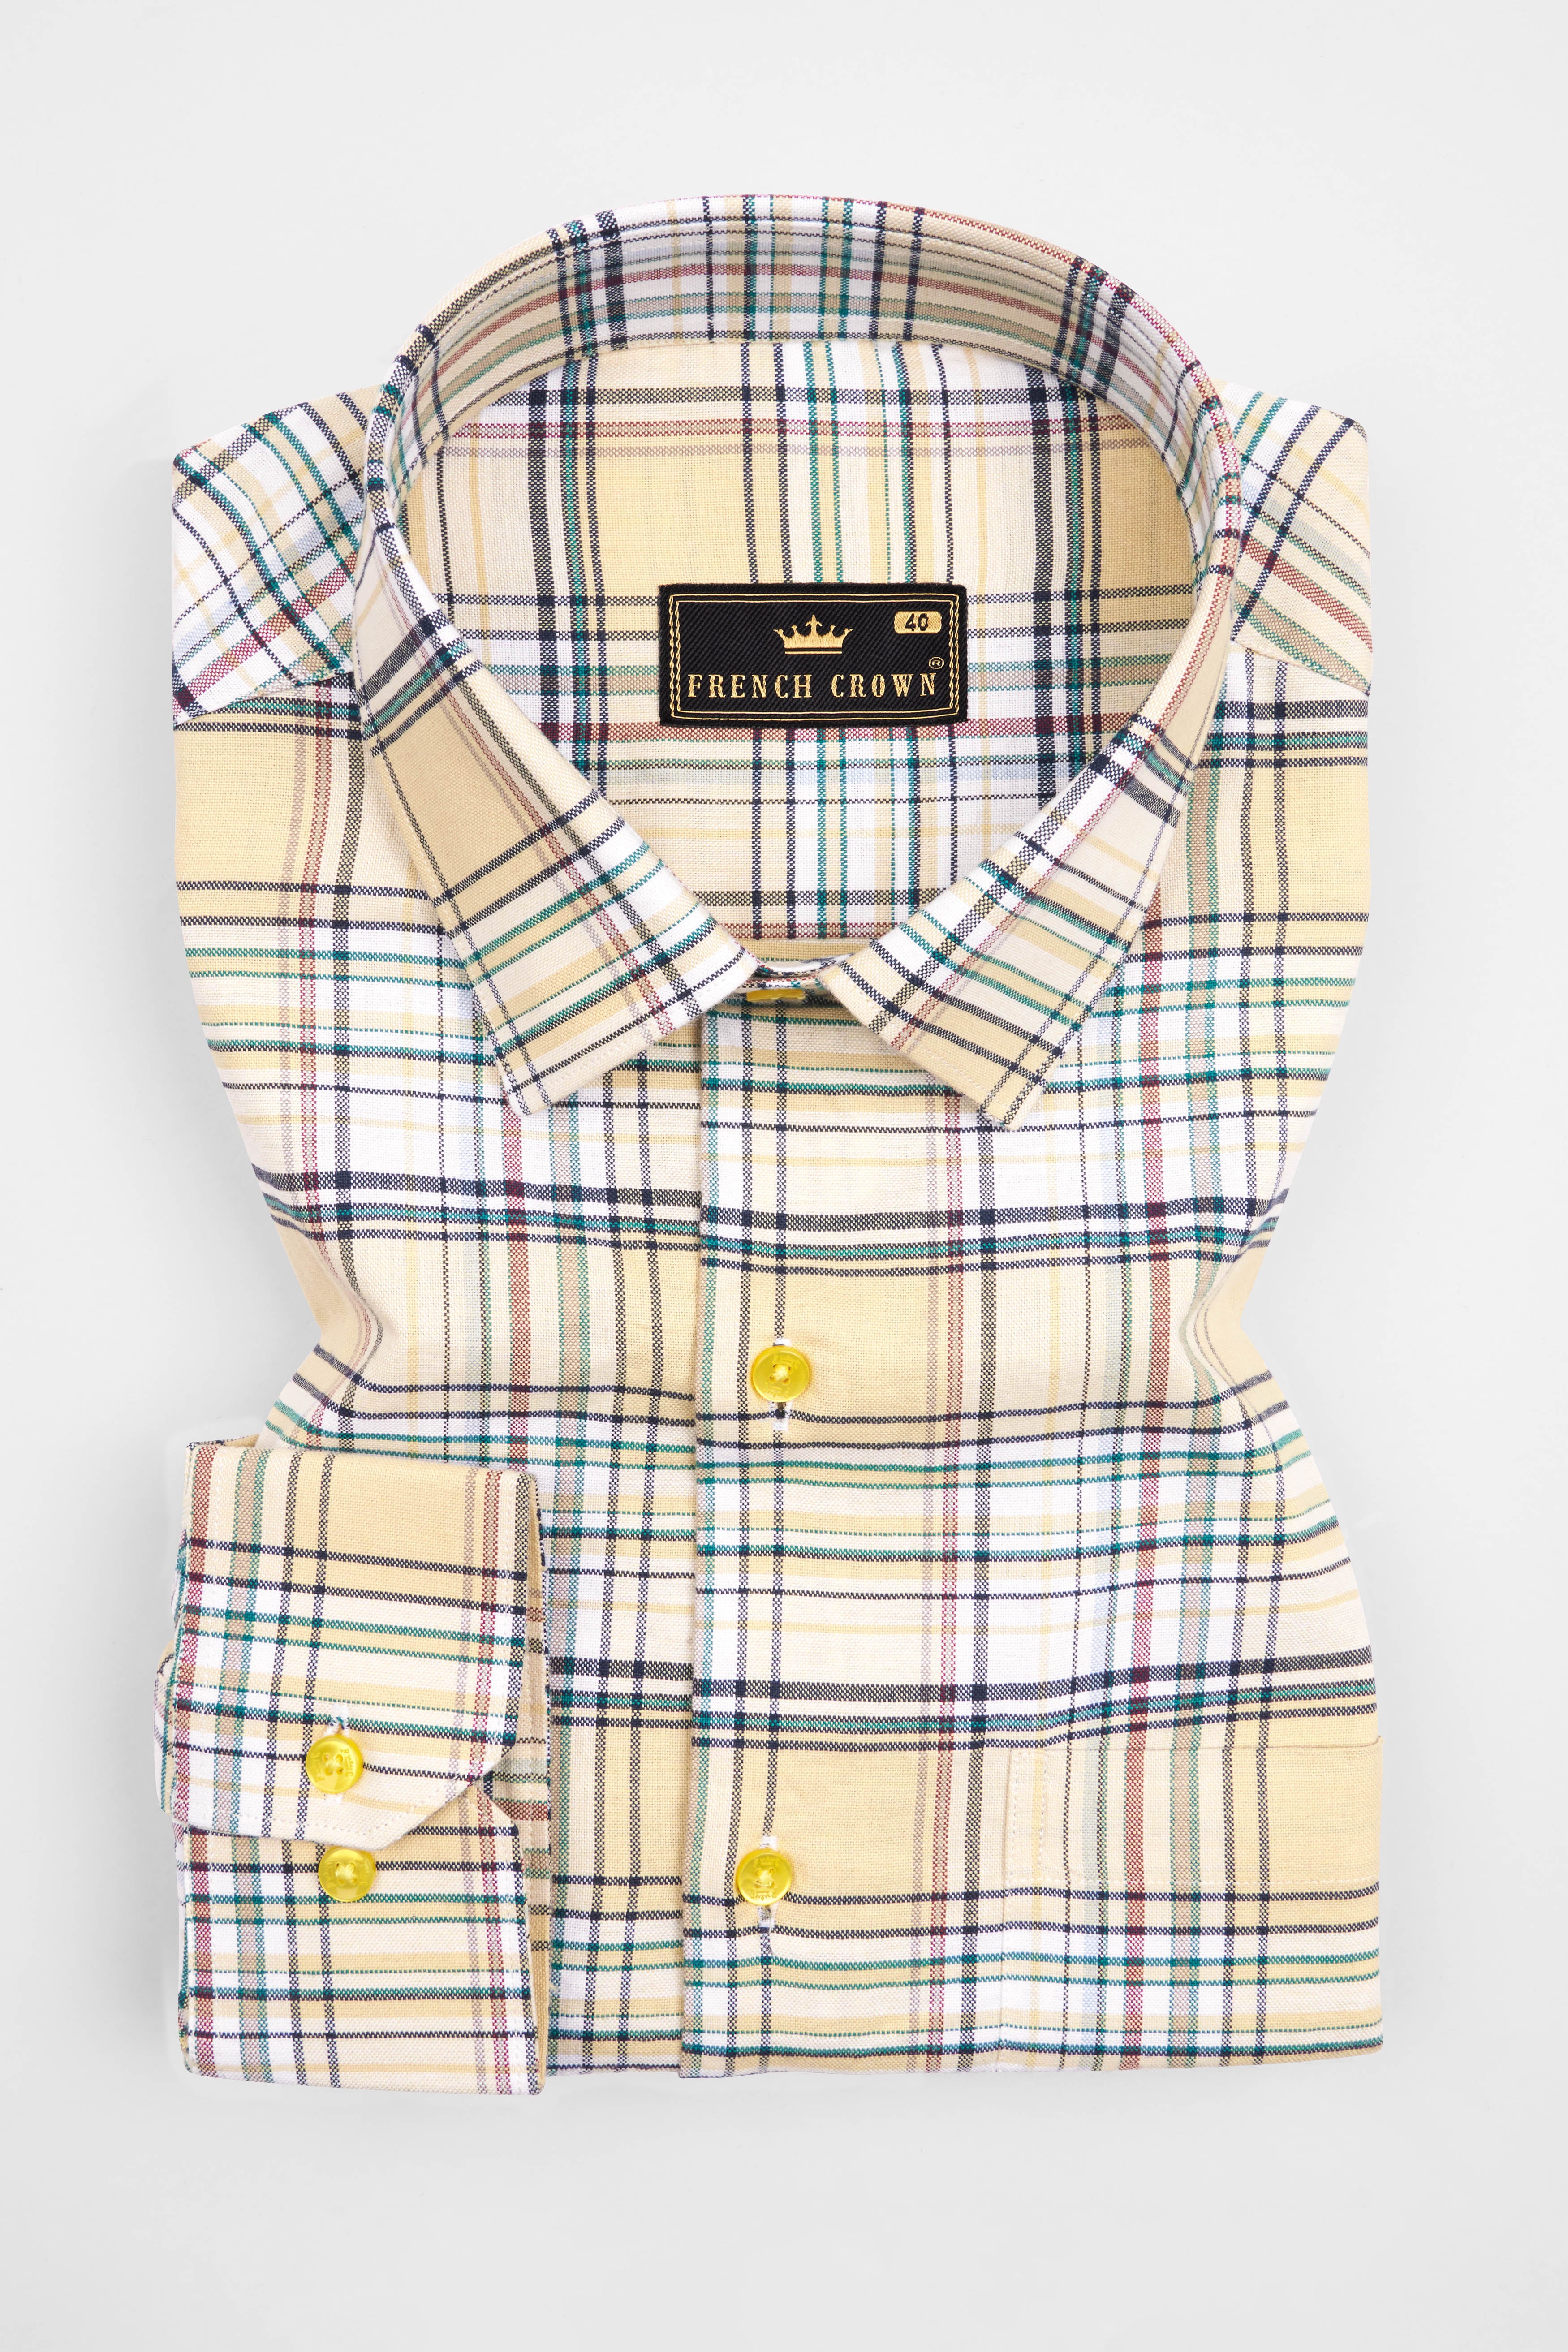 Chamois Beige with Oxley Green and Brownish Checkered Royal Oxford Shirt 10303-YL-38, 10303-YL-H-38, 10303-YL-39, 10303-YL-H-39, 10303-YL-40, 10303-YL-H-40, 10303-YL-42, 10303-YL-H-42, 10303-YL-44, 10303-YL-H-44, 10303-YL-46, 10303-YL-H-46, 10303-YL-48, 10303-YL-H-48, 10303-YL-50, 10303-YL-H-50, 10303-YL-52, 10303-YL-H-52